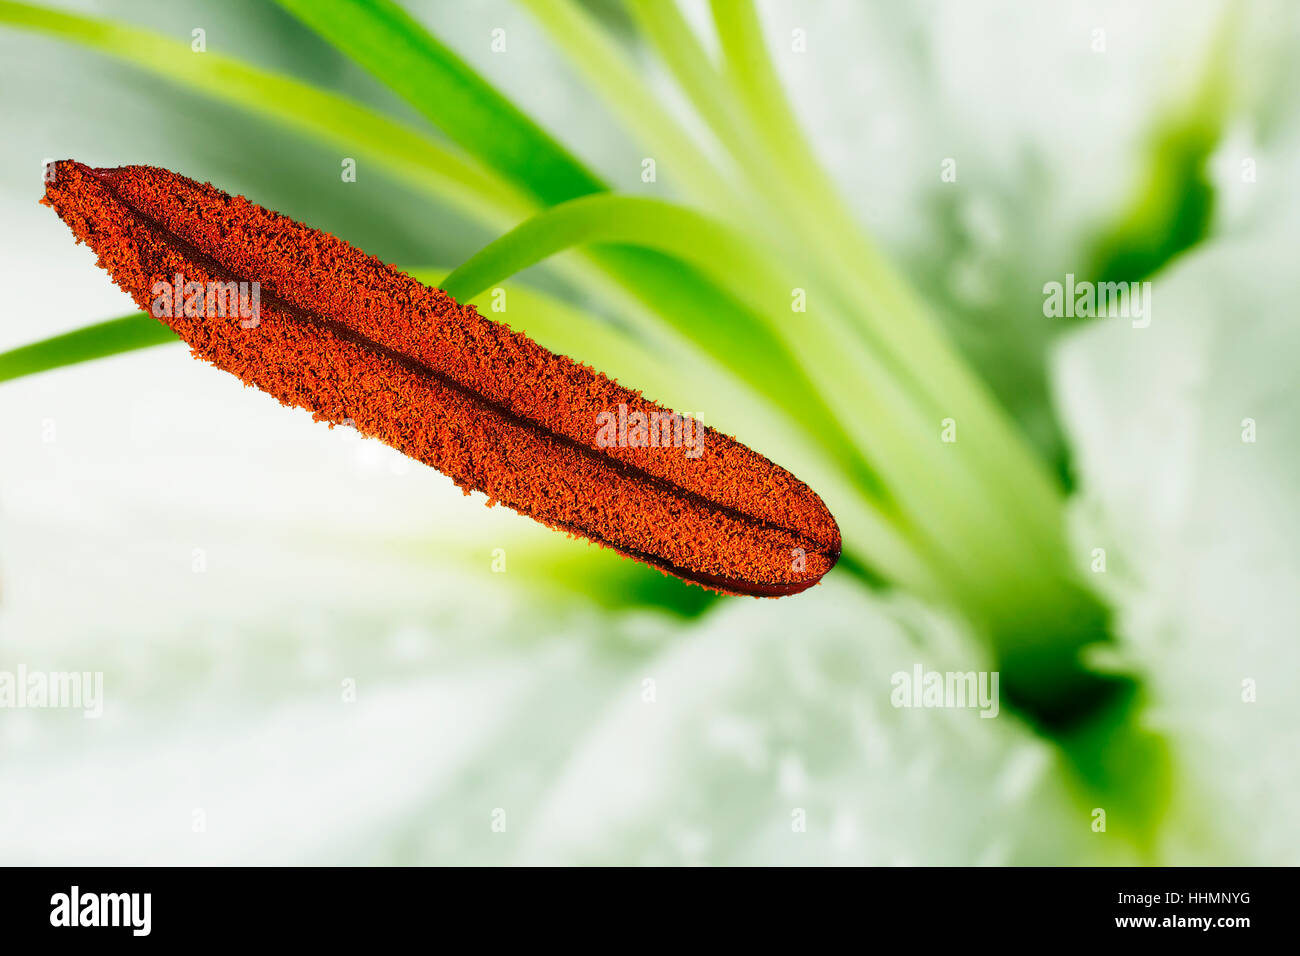 flower, plant, lily, nectar, augment, stamen, brown, brownish, brunette, lily, Stock Photo